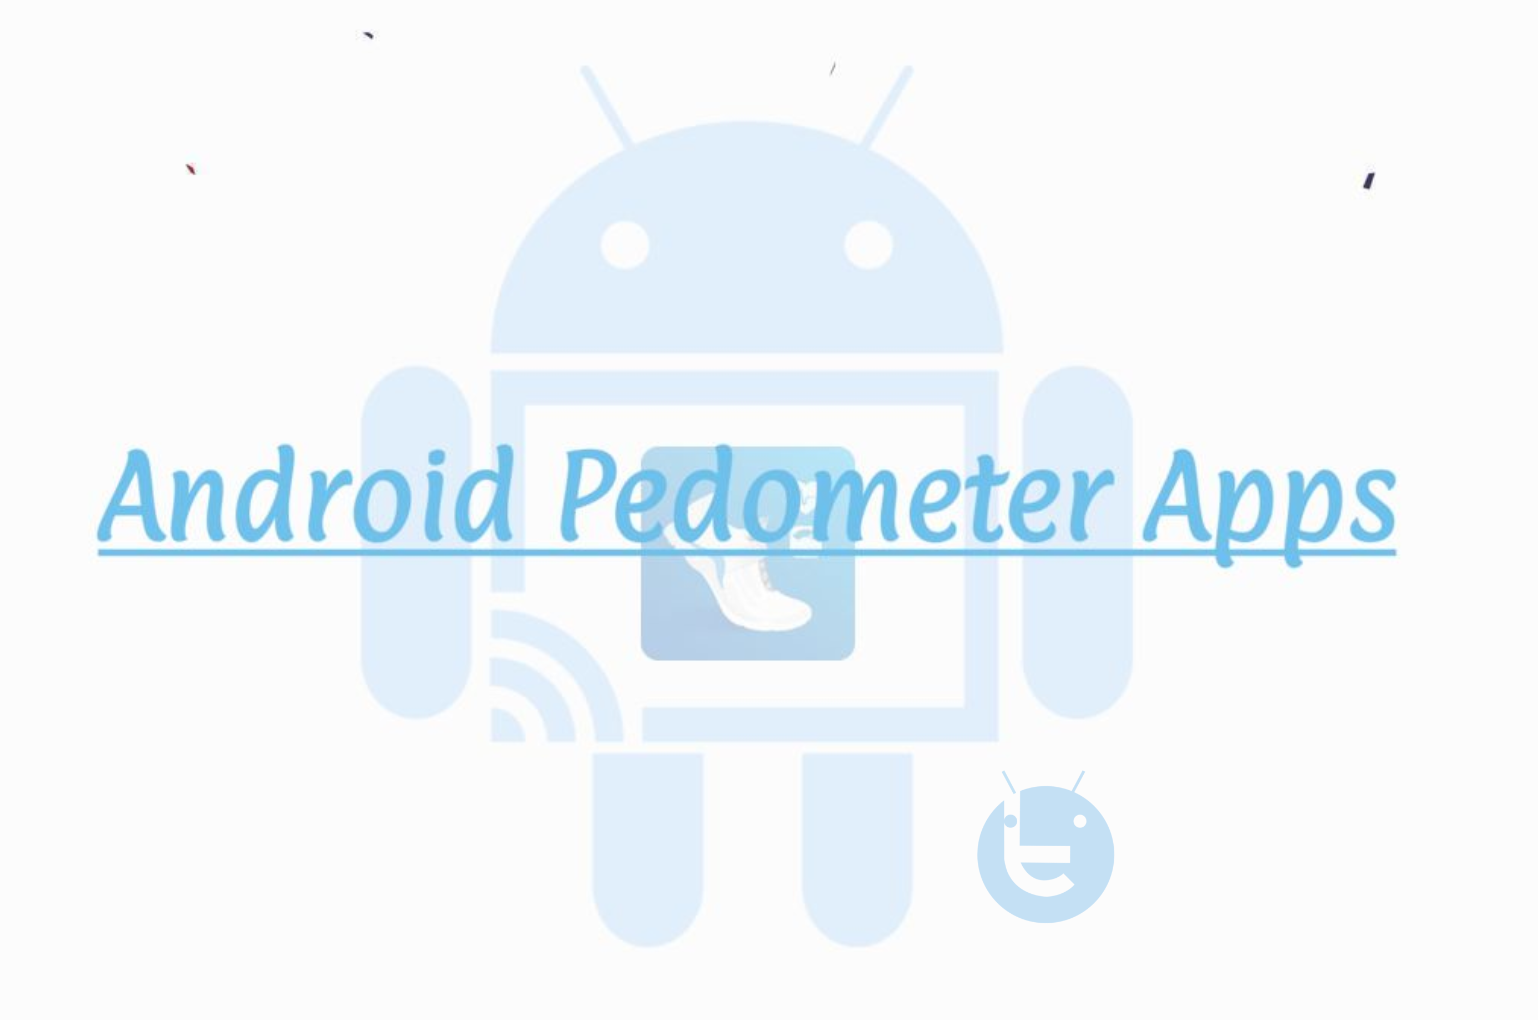 Android Pedometer Apps